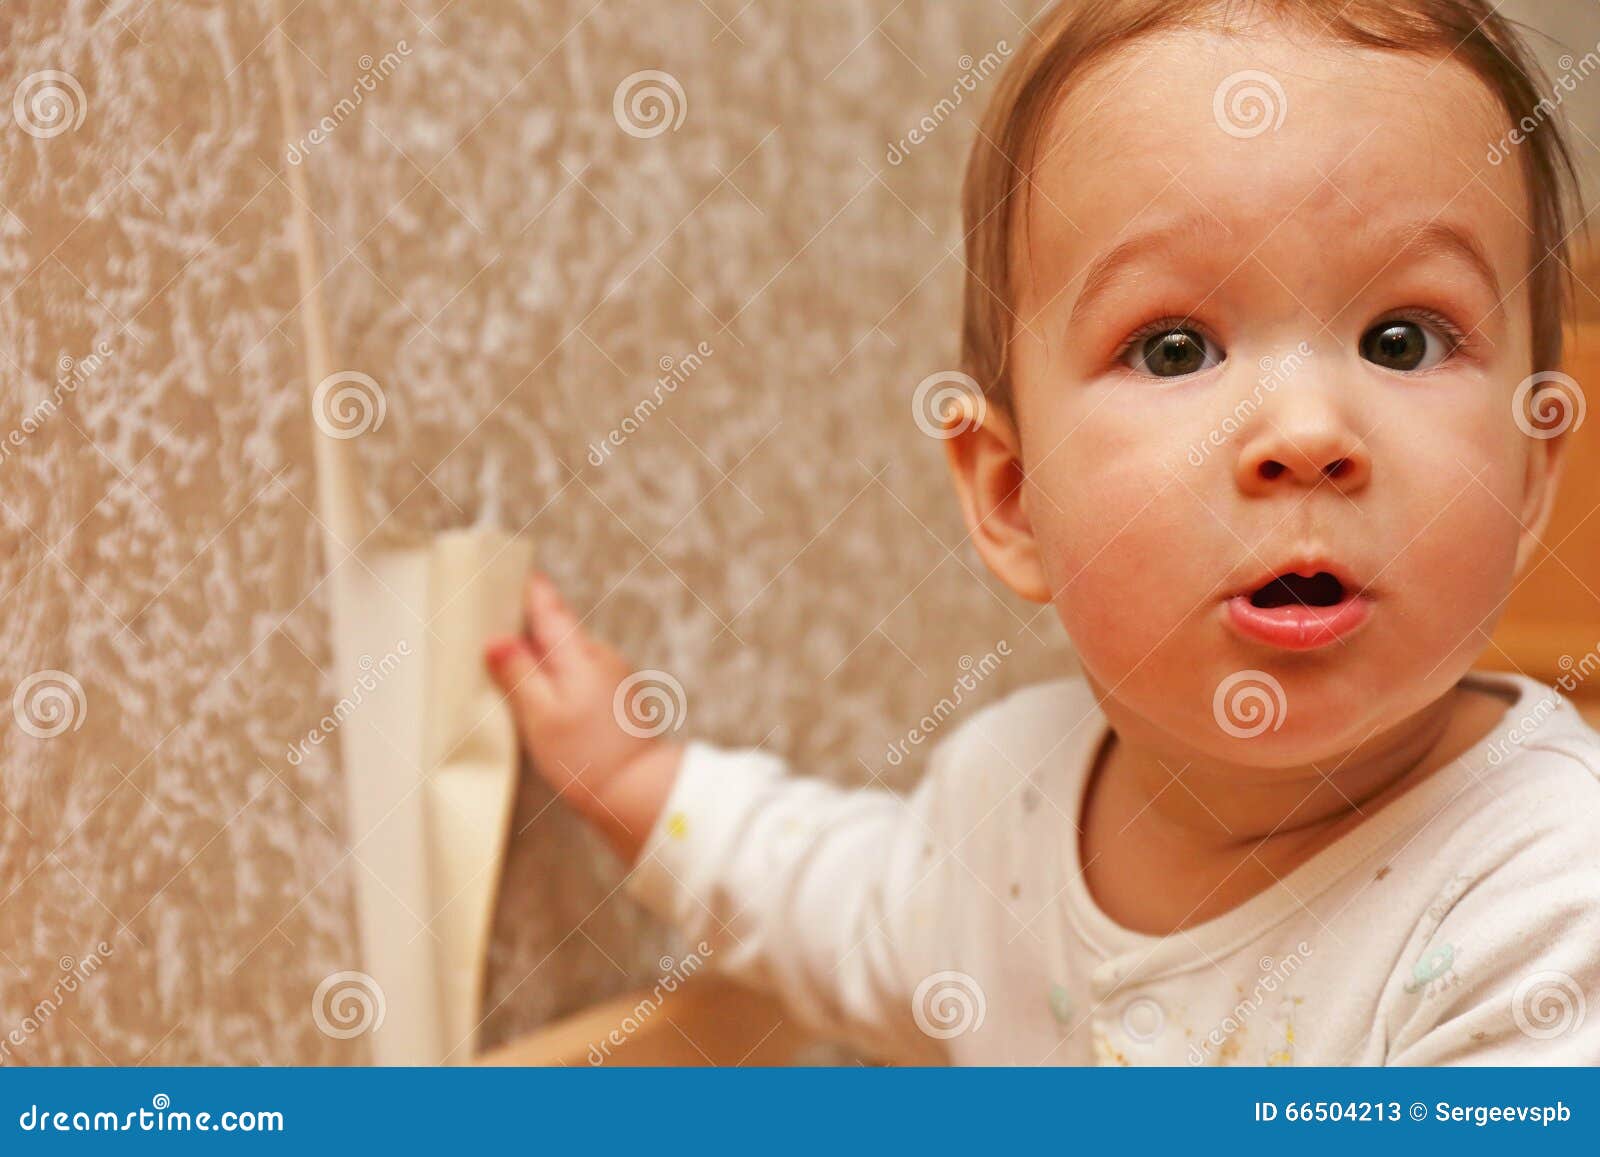 Child Tears Off a Piece of Wallpaper Stock Image - Image of play, home:  66504213